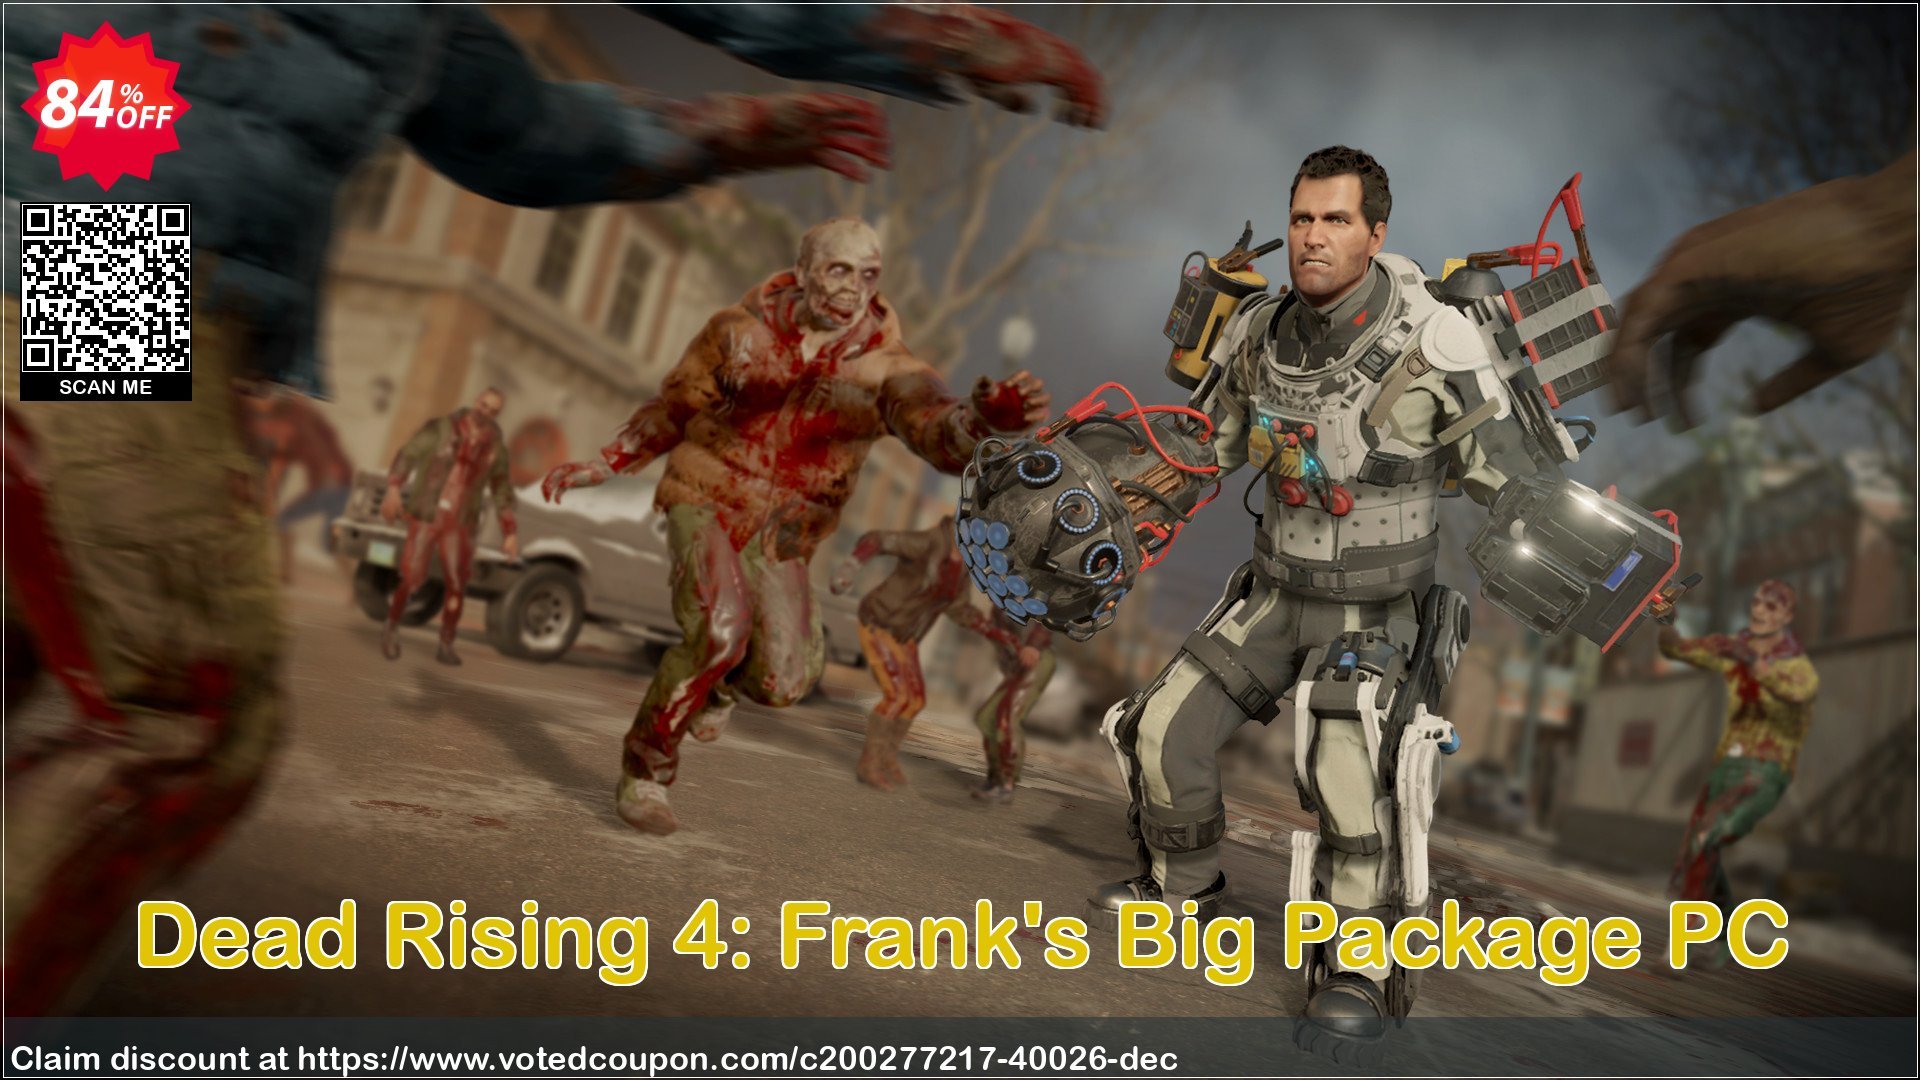 Dead Rising 4: Frank's Big Package PC Coupon Code May 2024, 84% OFF - VotedCoupon